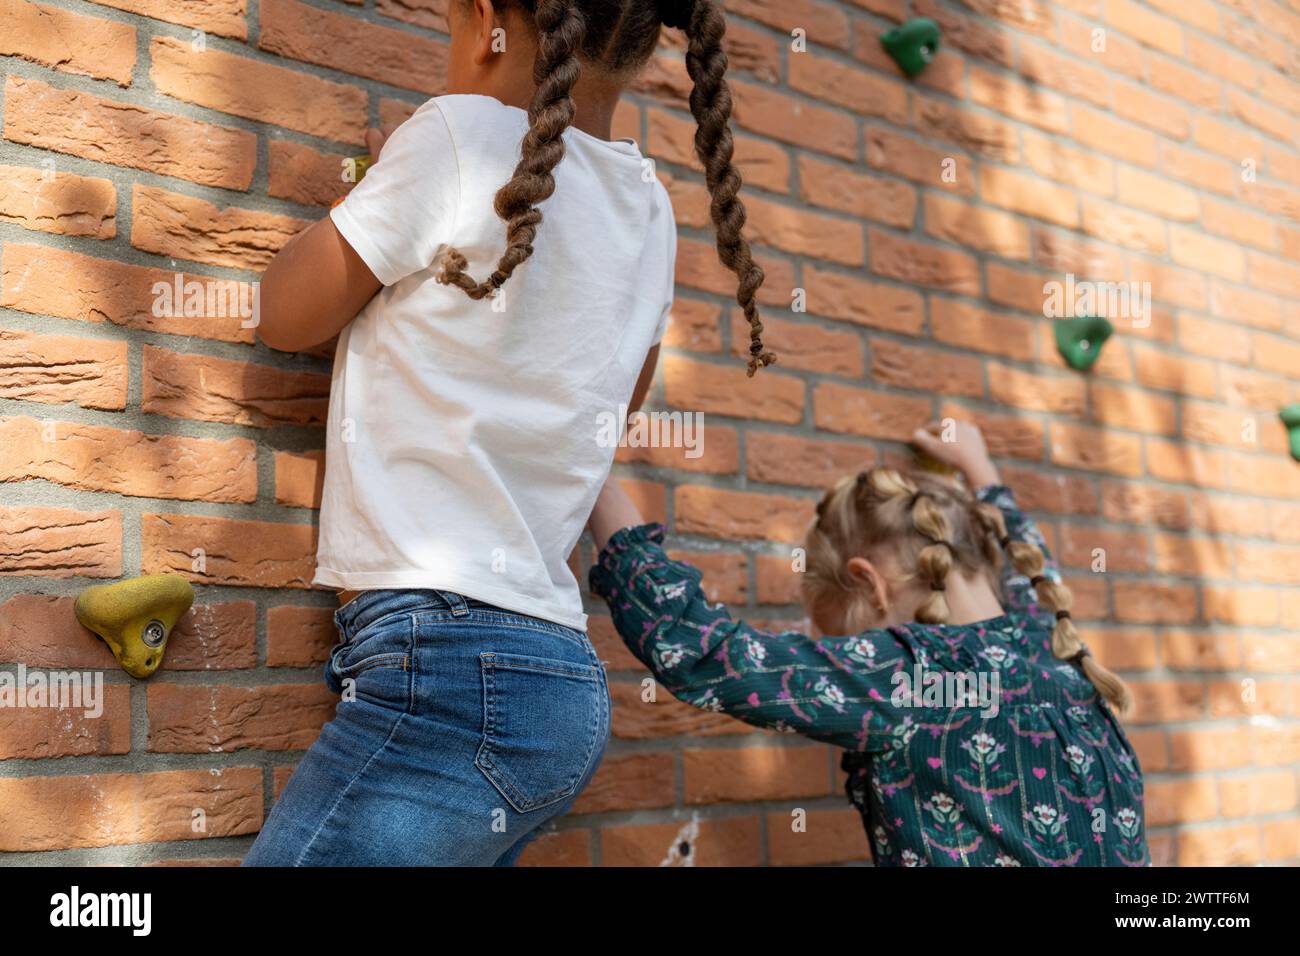 Two children engaged in rock climbing on an artificial climbing wall. Stock Photo